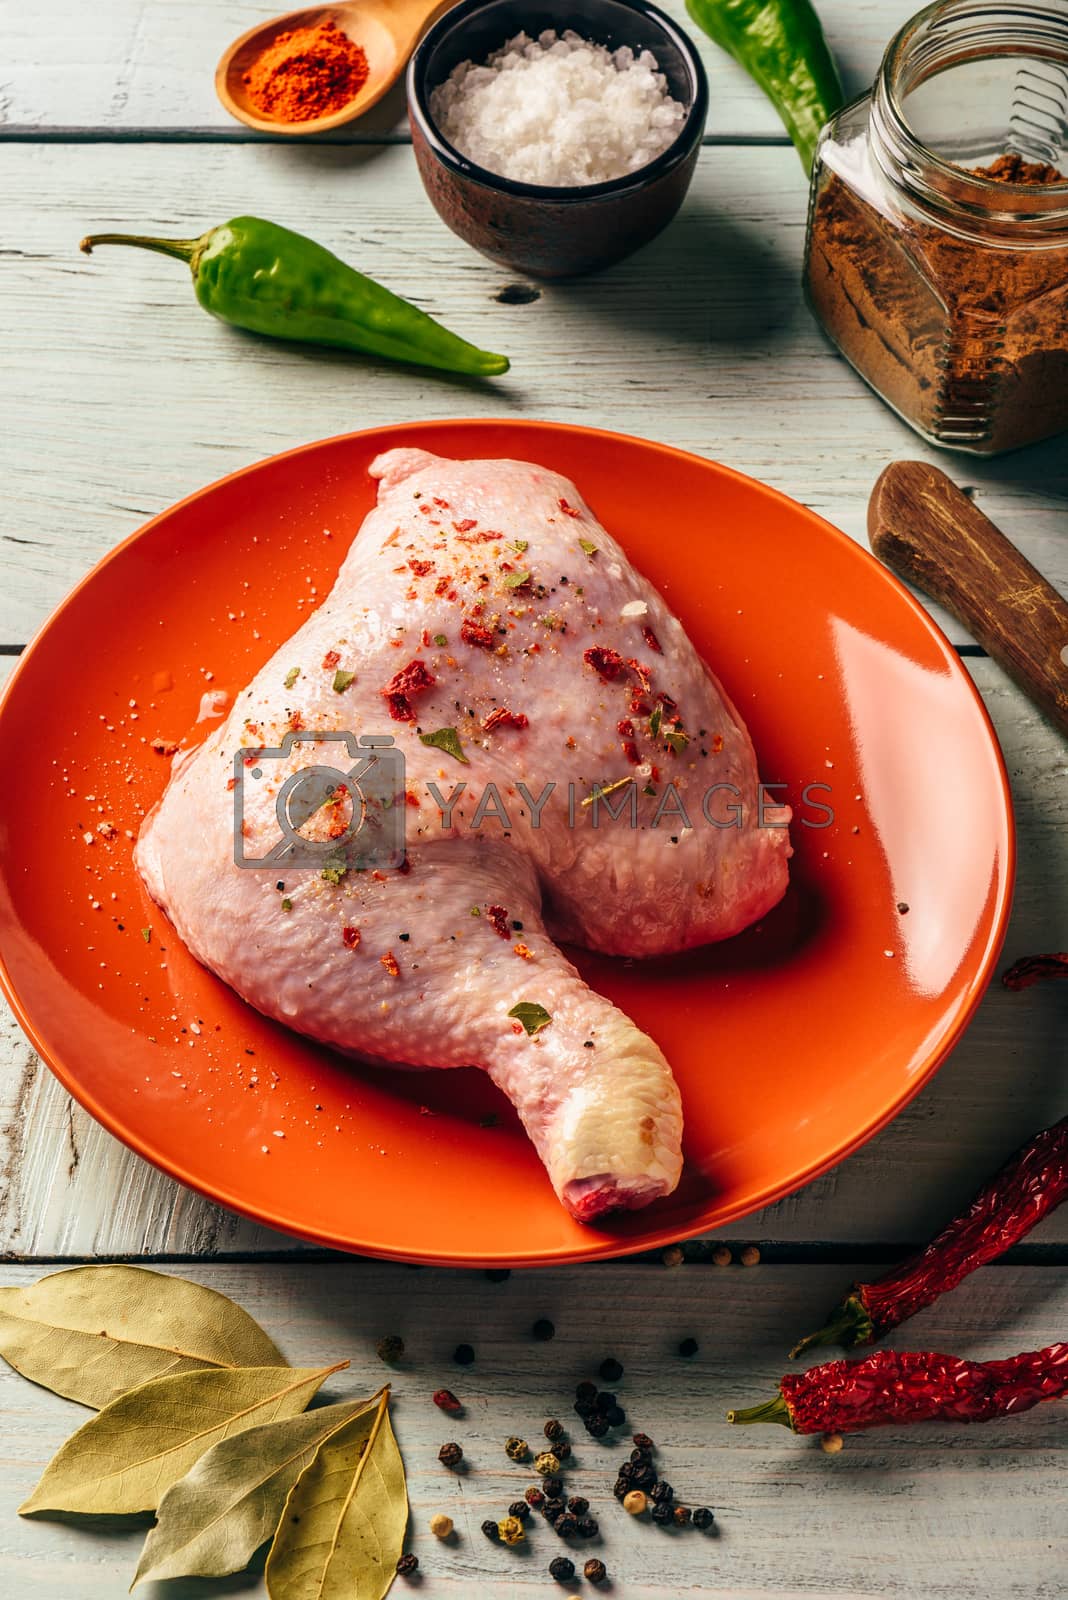 Royalty free image of chicken leg quarter on plate with different spices by Seva_blsv